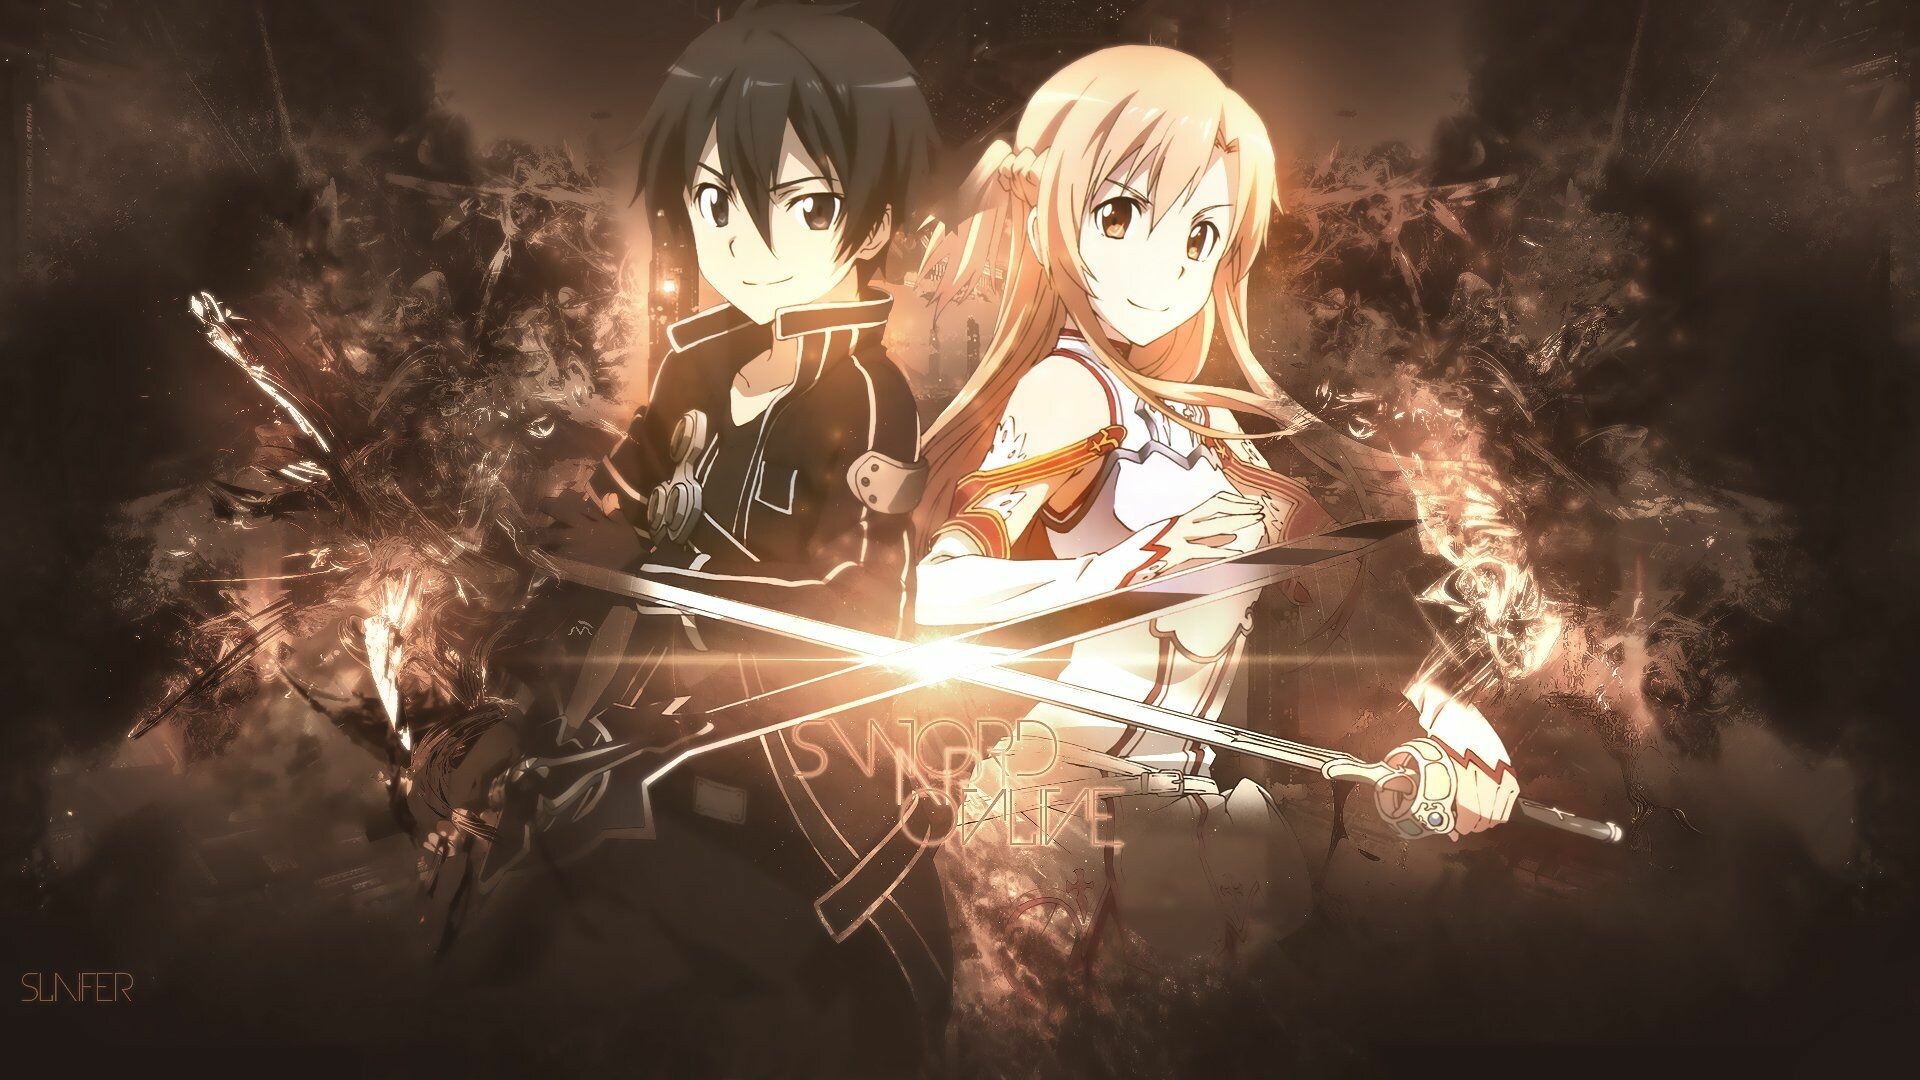 Sword Art Online Wallpaper: HD, 4K, 5K for PC and Mobile. Download free image for iPhone, Android